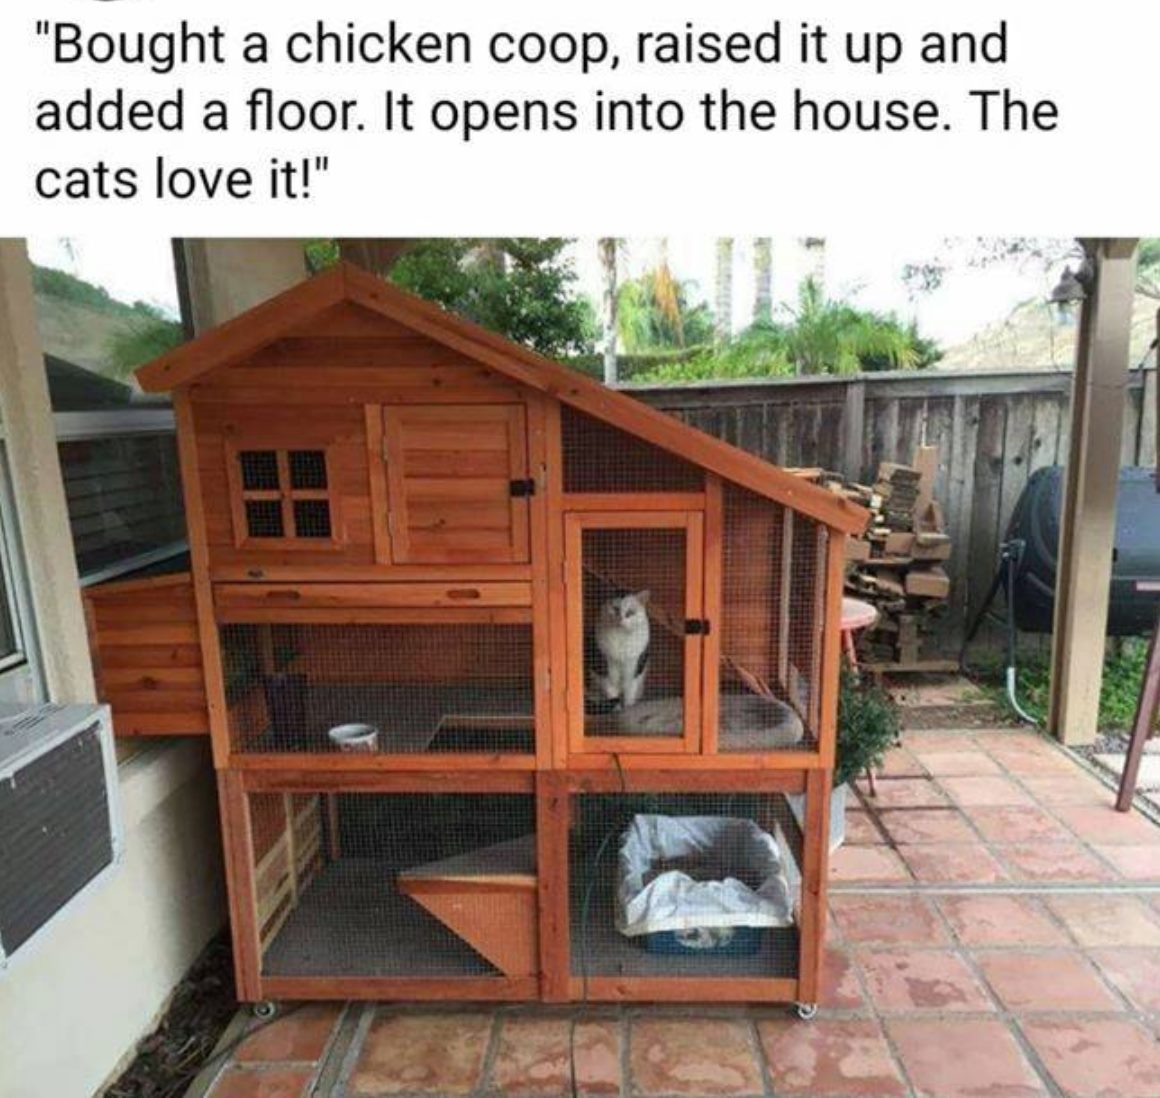 outdoor cat house plans - "Bought a chicken coop, raised it up and added a floor. It opens into the house. The cats love it!"